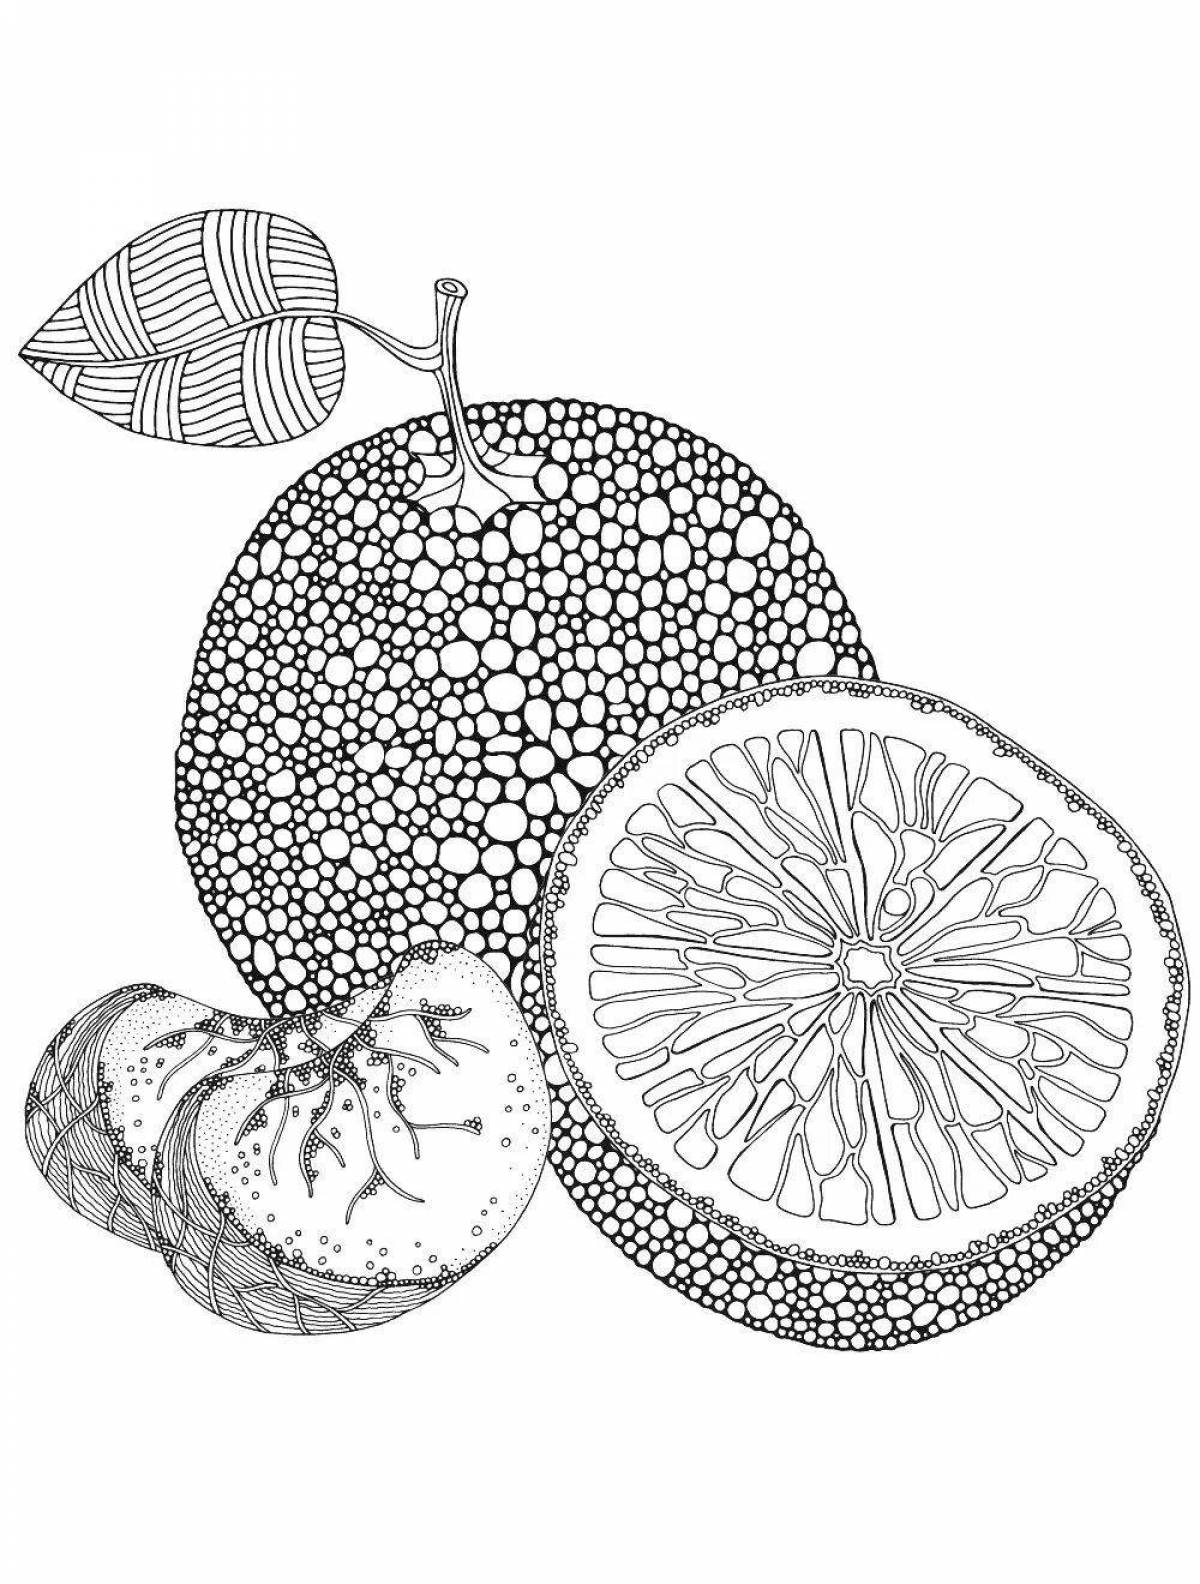 Exciting anti-stress fruit coloring book